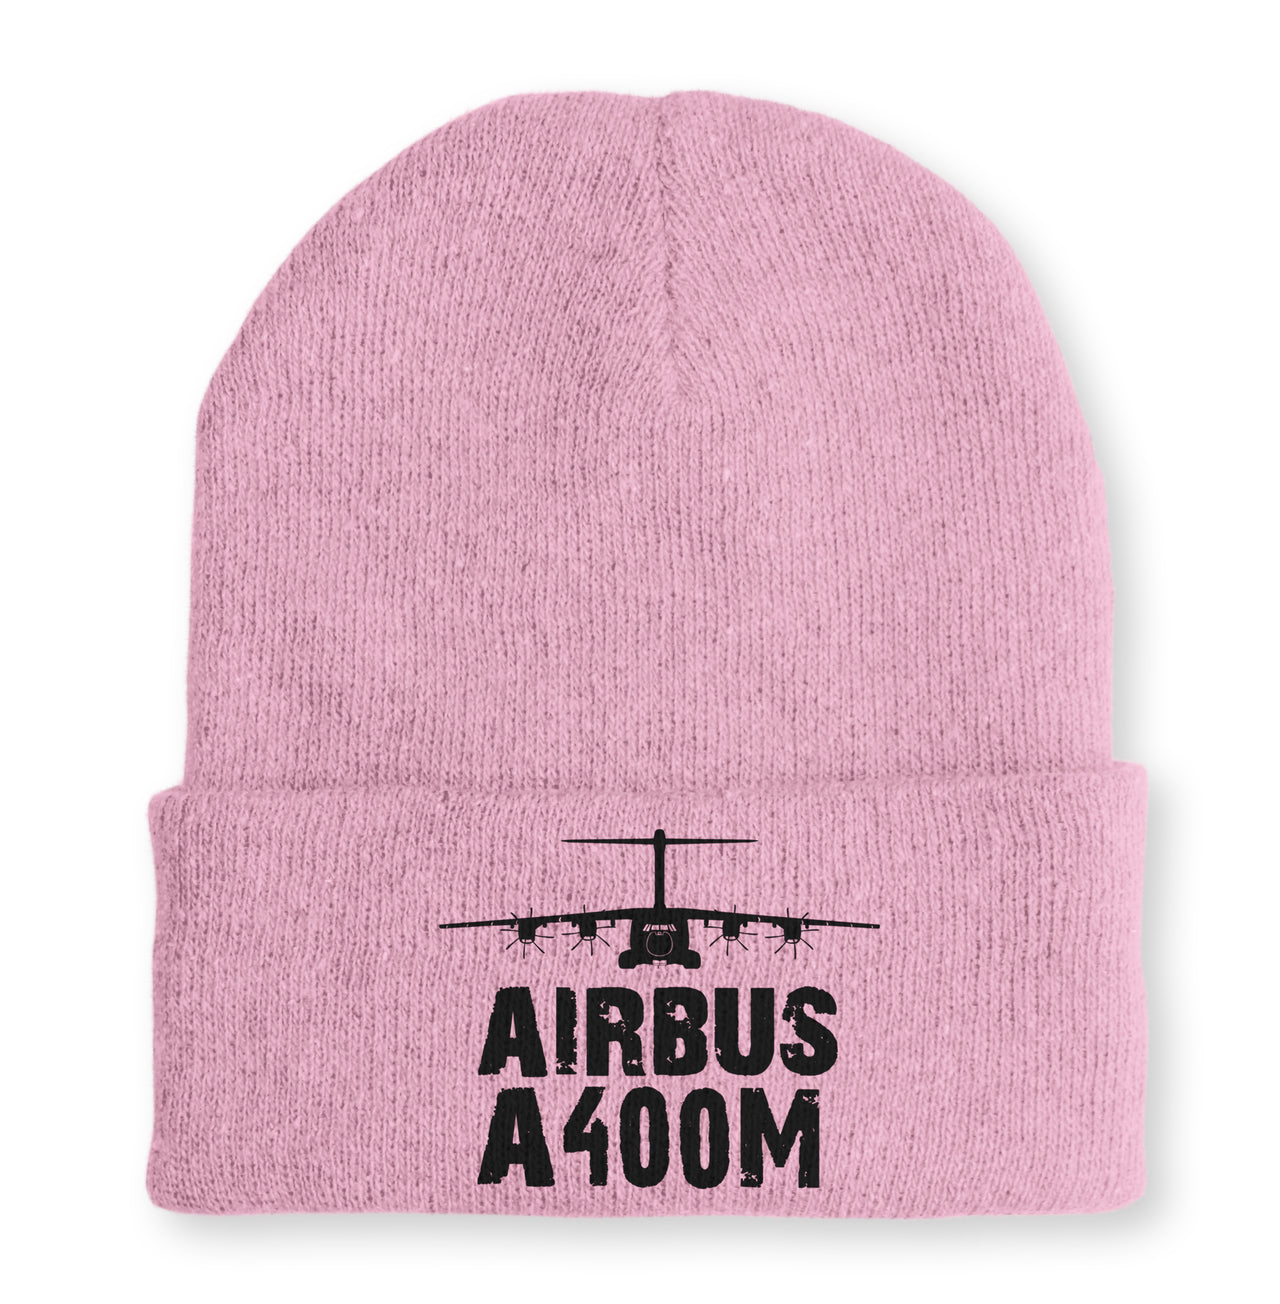 Airbus A400M & Plane Embroidered Beanies